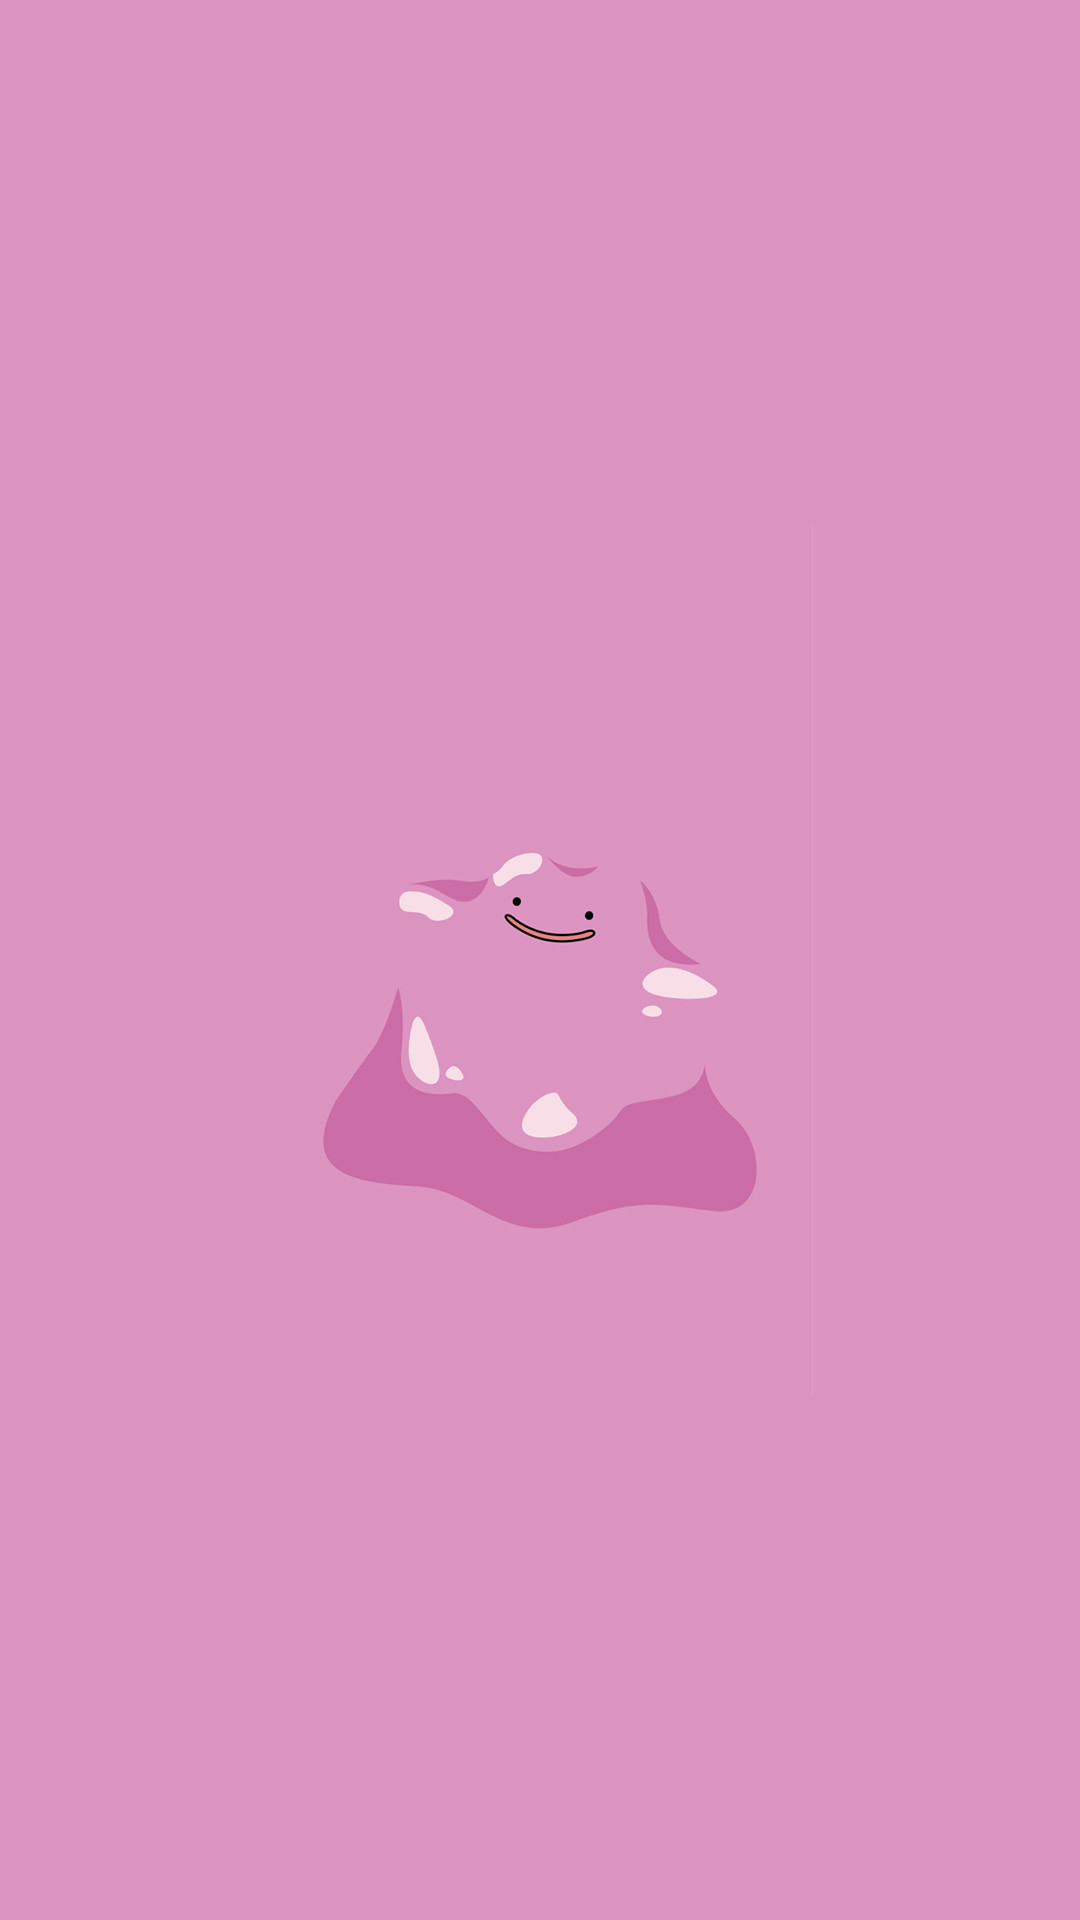 Ditto Pokemon Character iPhone 6+ HD Wallpaper – https://freebestpicture.com